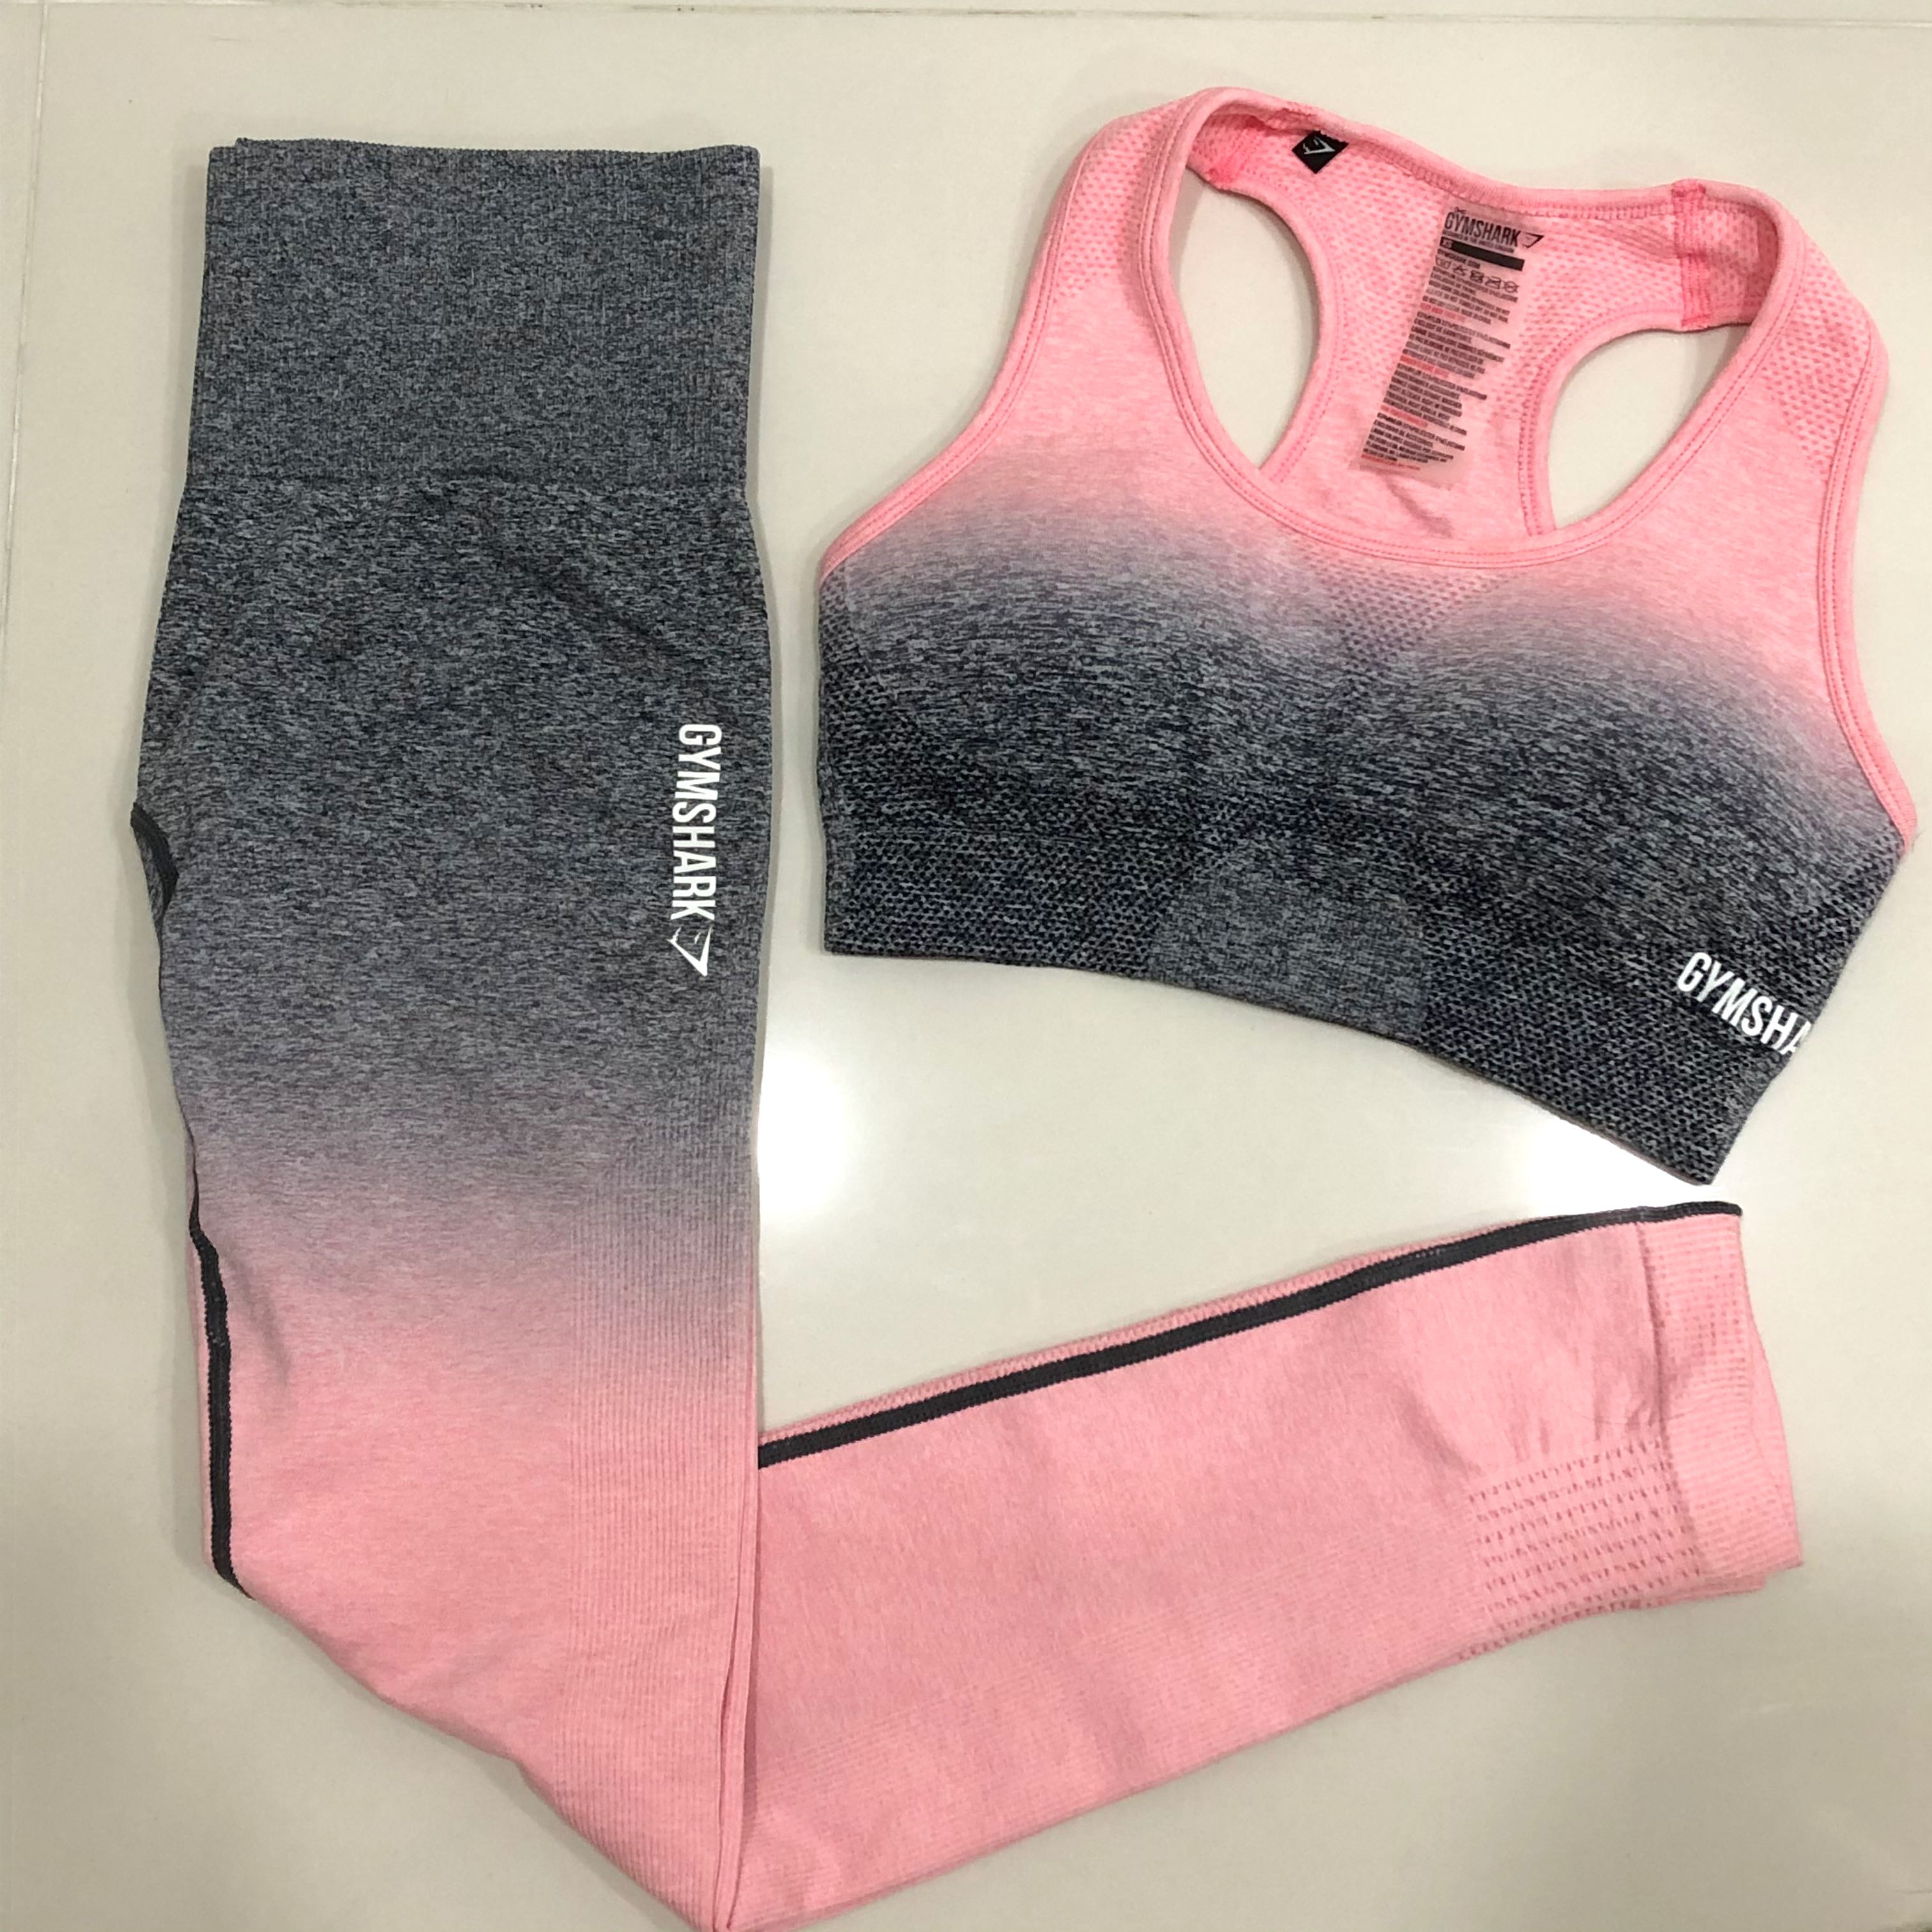 Set> Gymshark Ombre Seamless Sports Bra & Leggings - Peach Pink/charcoal XS  Extra Small, Women's Fashion, Activewear on Carousell